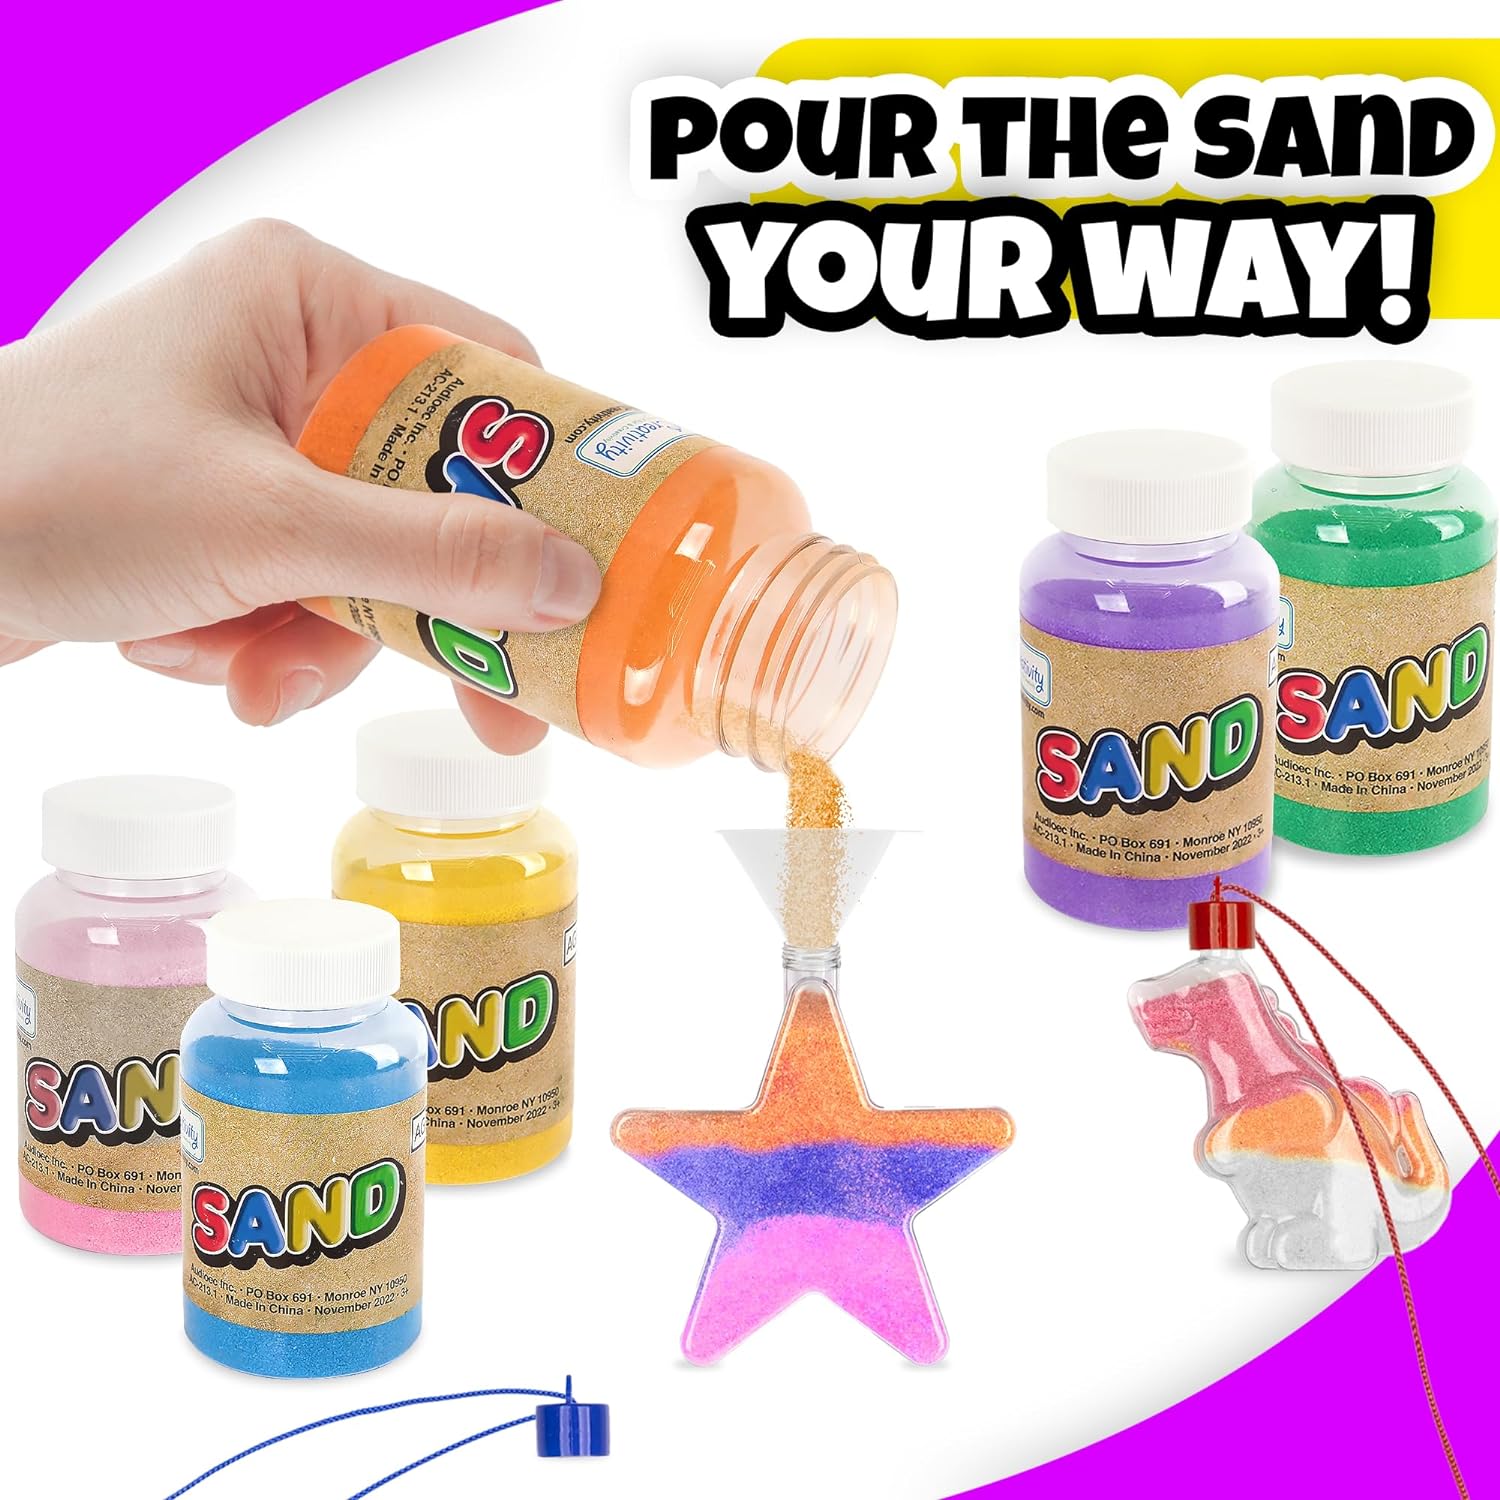 ArtCreativity Colored Sand Art Kits for Kids 40-Pack, Play Sand Set, 10 Assorted Colors, 8 oz. Each, 24 Sand Art Bottle Necklaces, and 6 Funnels Bulk Sand Art Project, Kids Party Crafts for Boys Girls